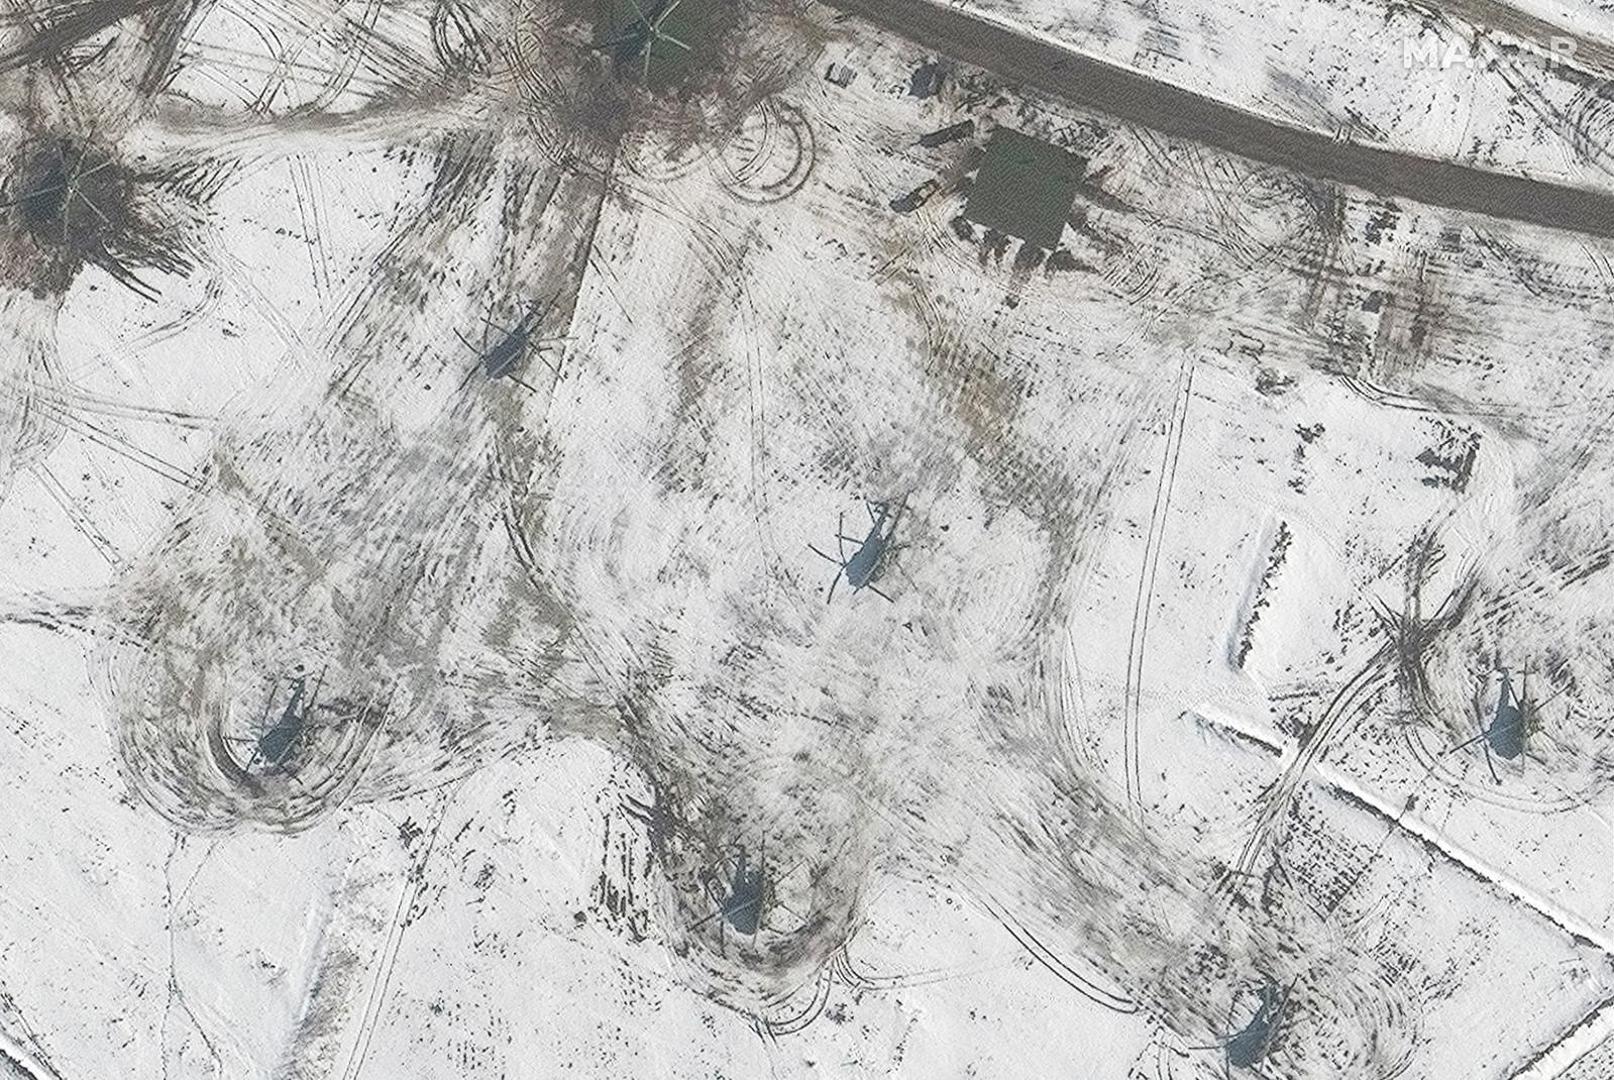 A satellite image shows a closer view of a helicopter deployment, in Valuyki, Russia February 20, 2022. Maxar Technologies/Handout via REUTERS ATTENTION EDITORS - THIS IMAGE HAS BEEN SUPPLIED BY A THIRD PARTY. NO RESALES. NO ARCHIVES. MANDATORY CREDIT. DO NOT OBSCURE LOGO Photo: MAXAR TECHNOLOGIES/REUTERS